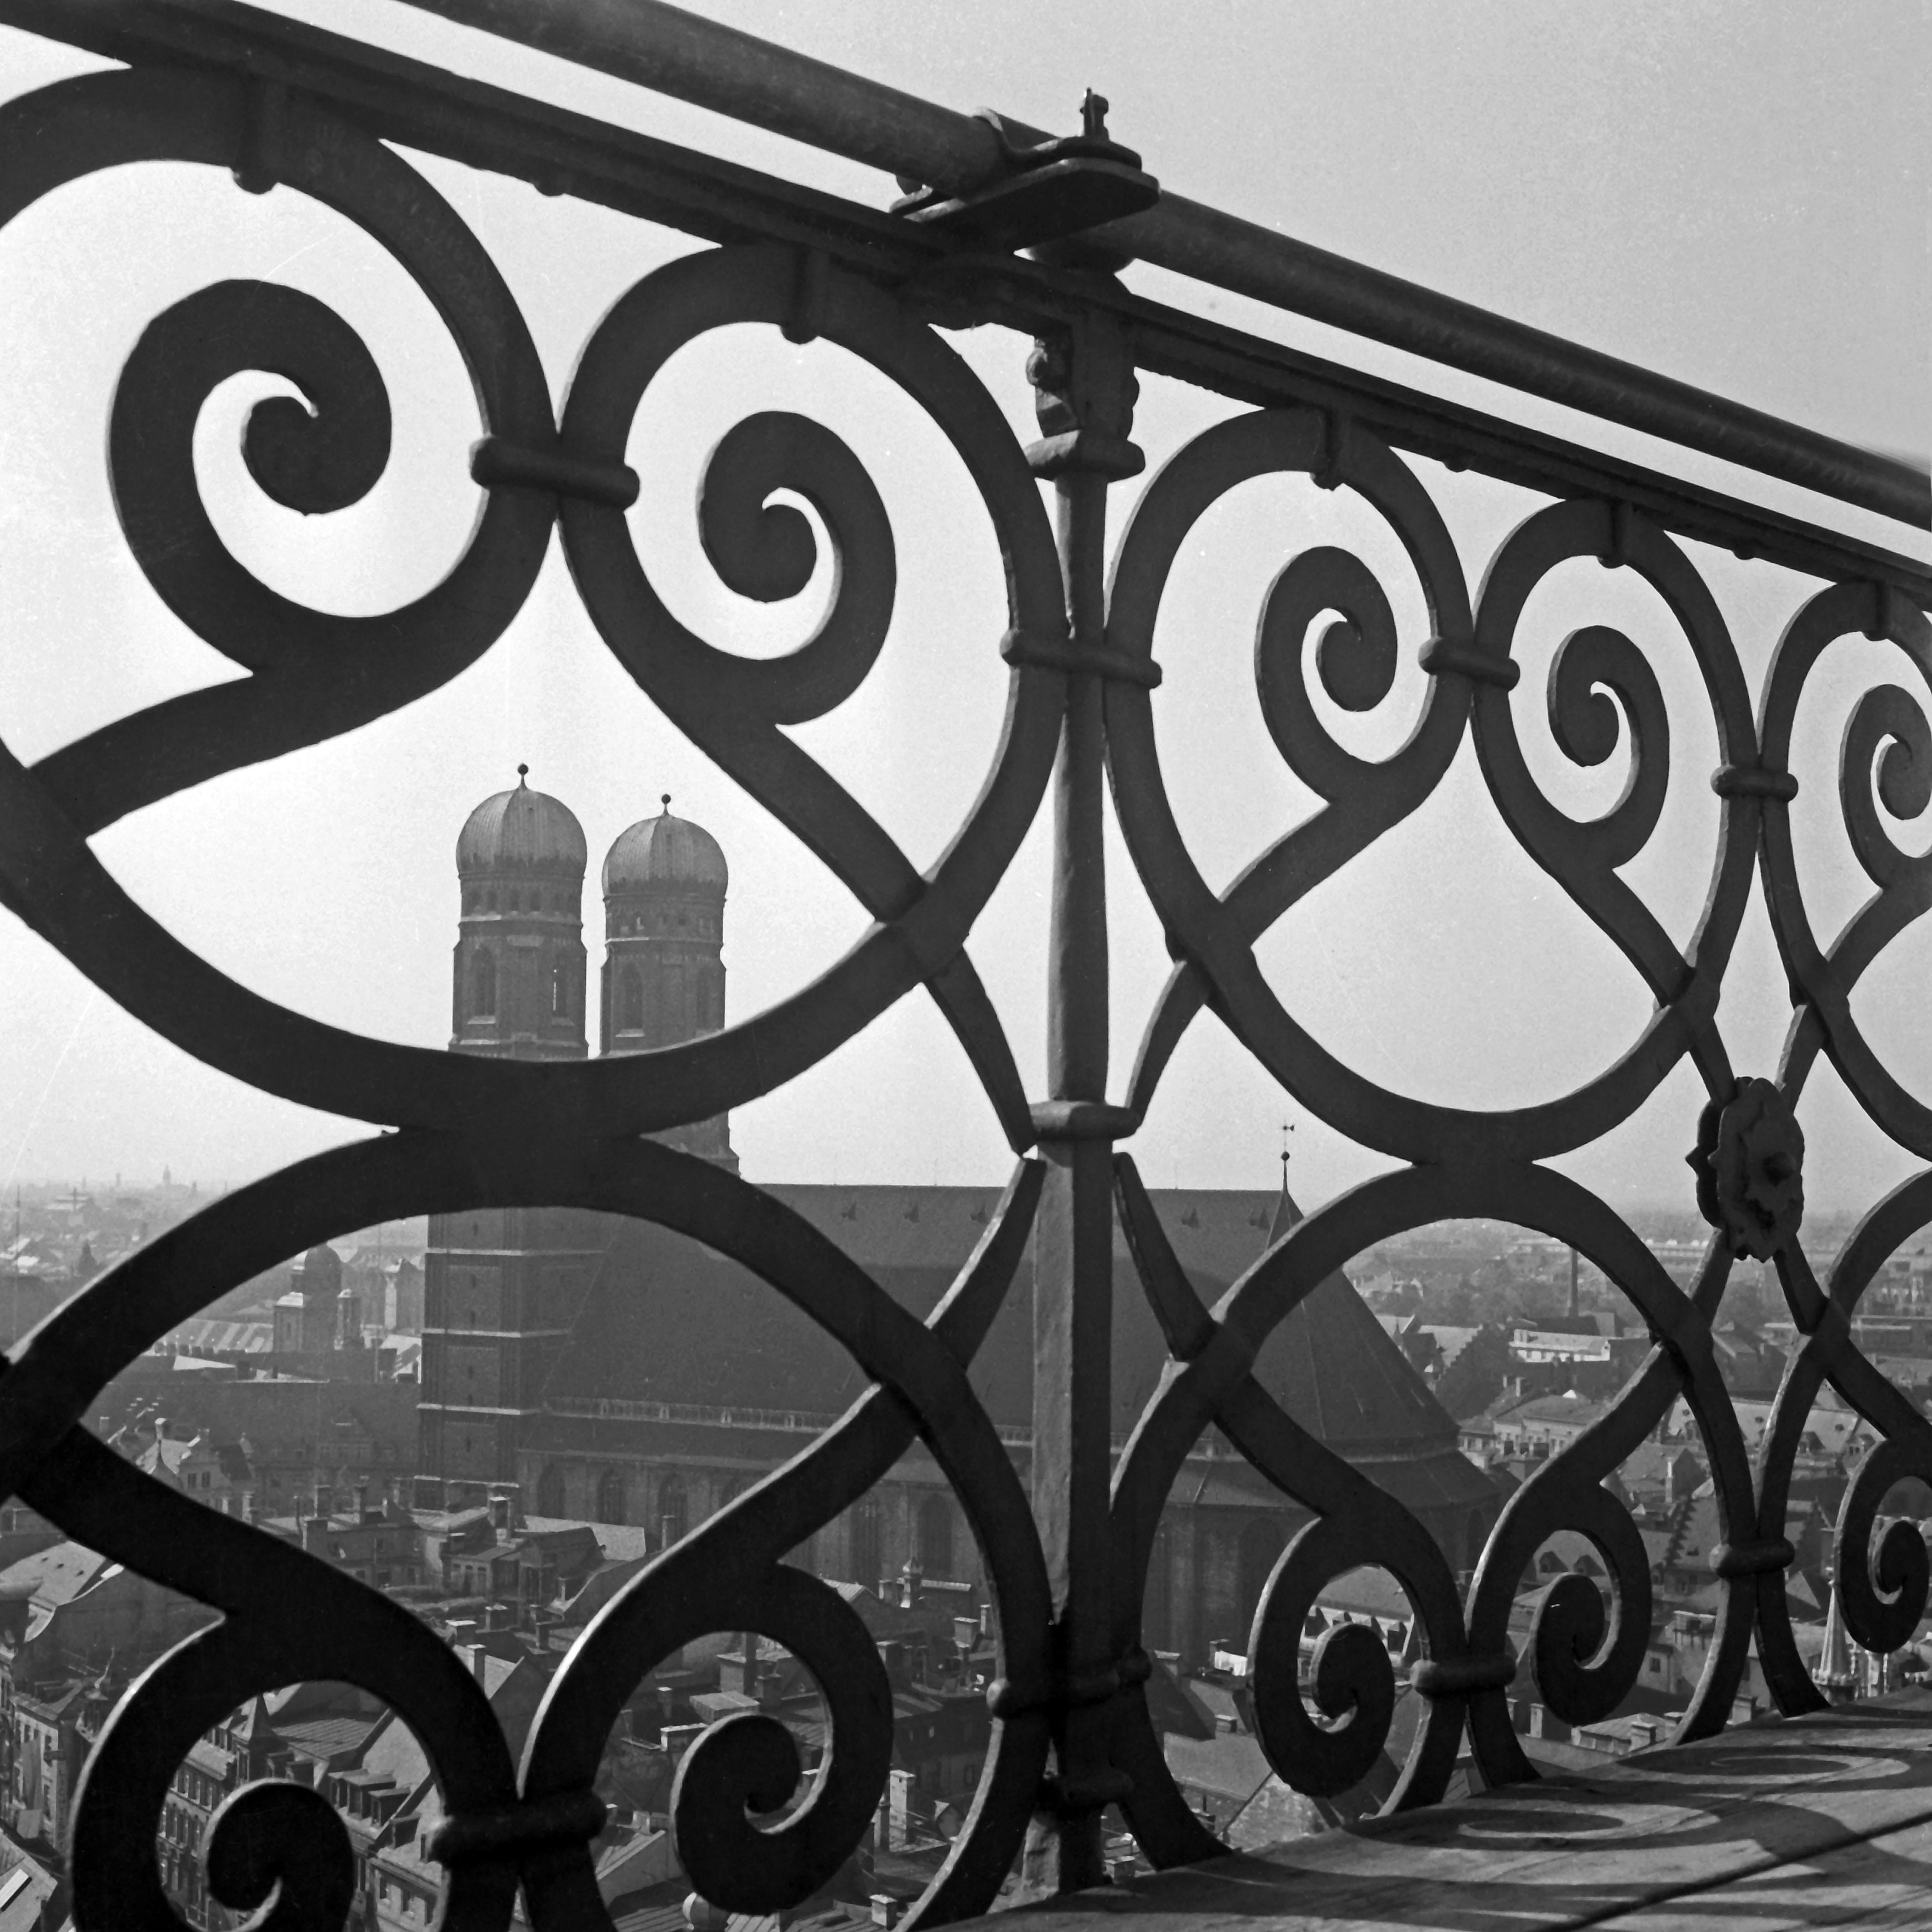 Karl Heinrich Lämmel Black and White Photograph - View to Munich Frauenkirche church with railing, Germany 1938, Printed Later